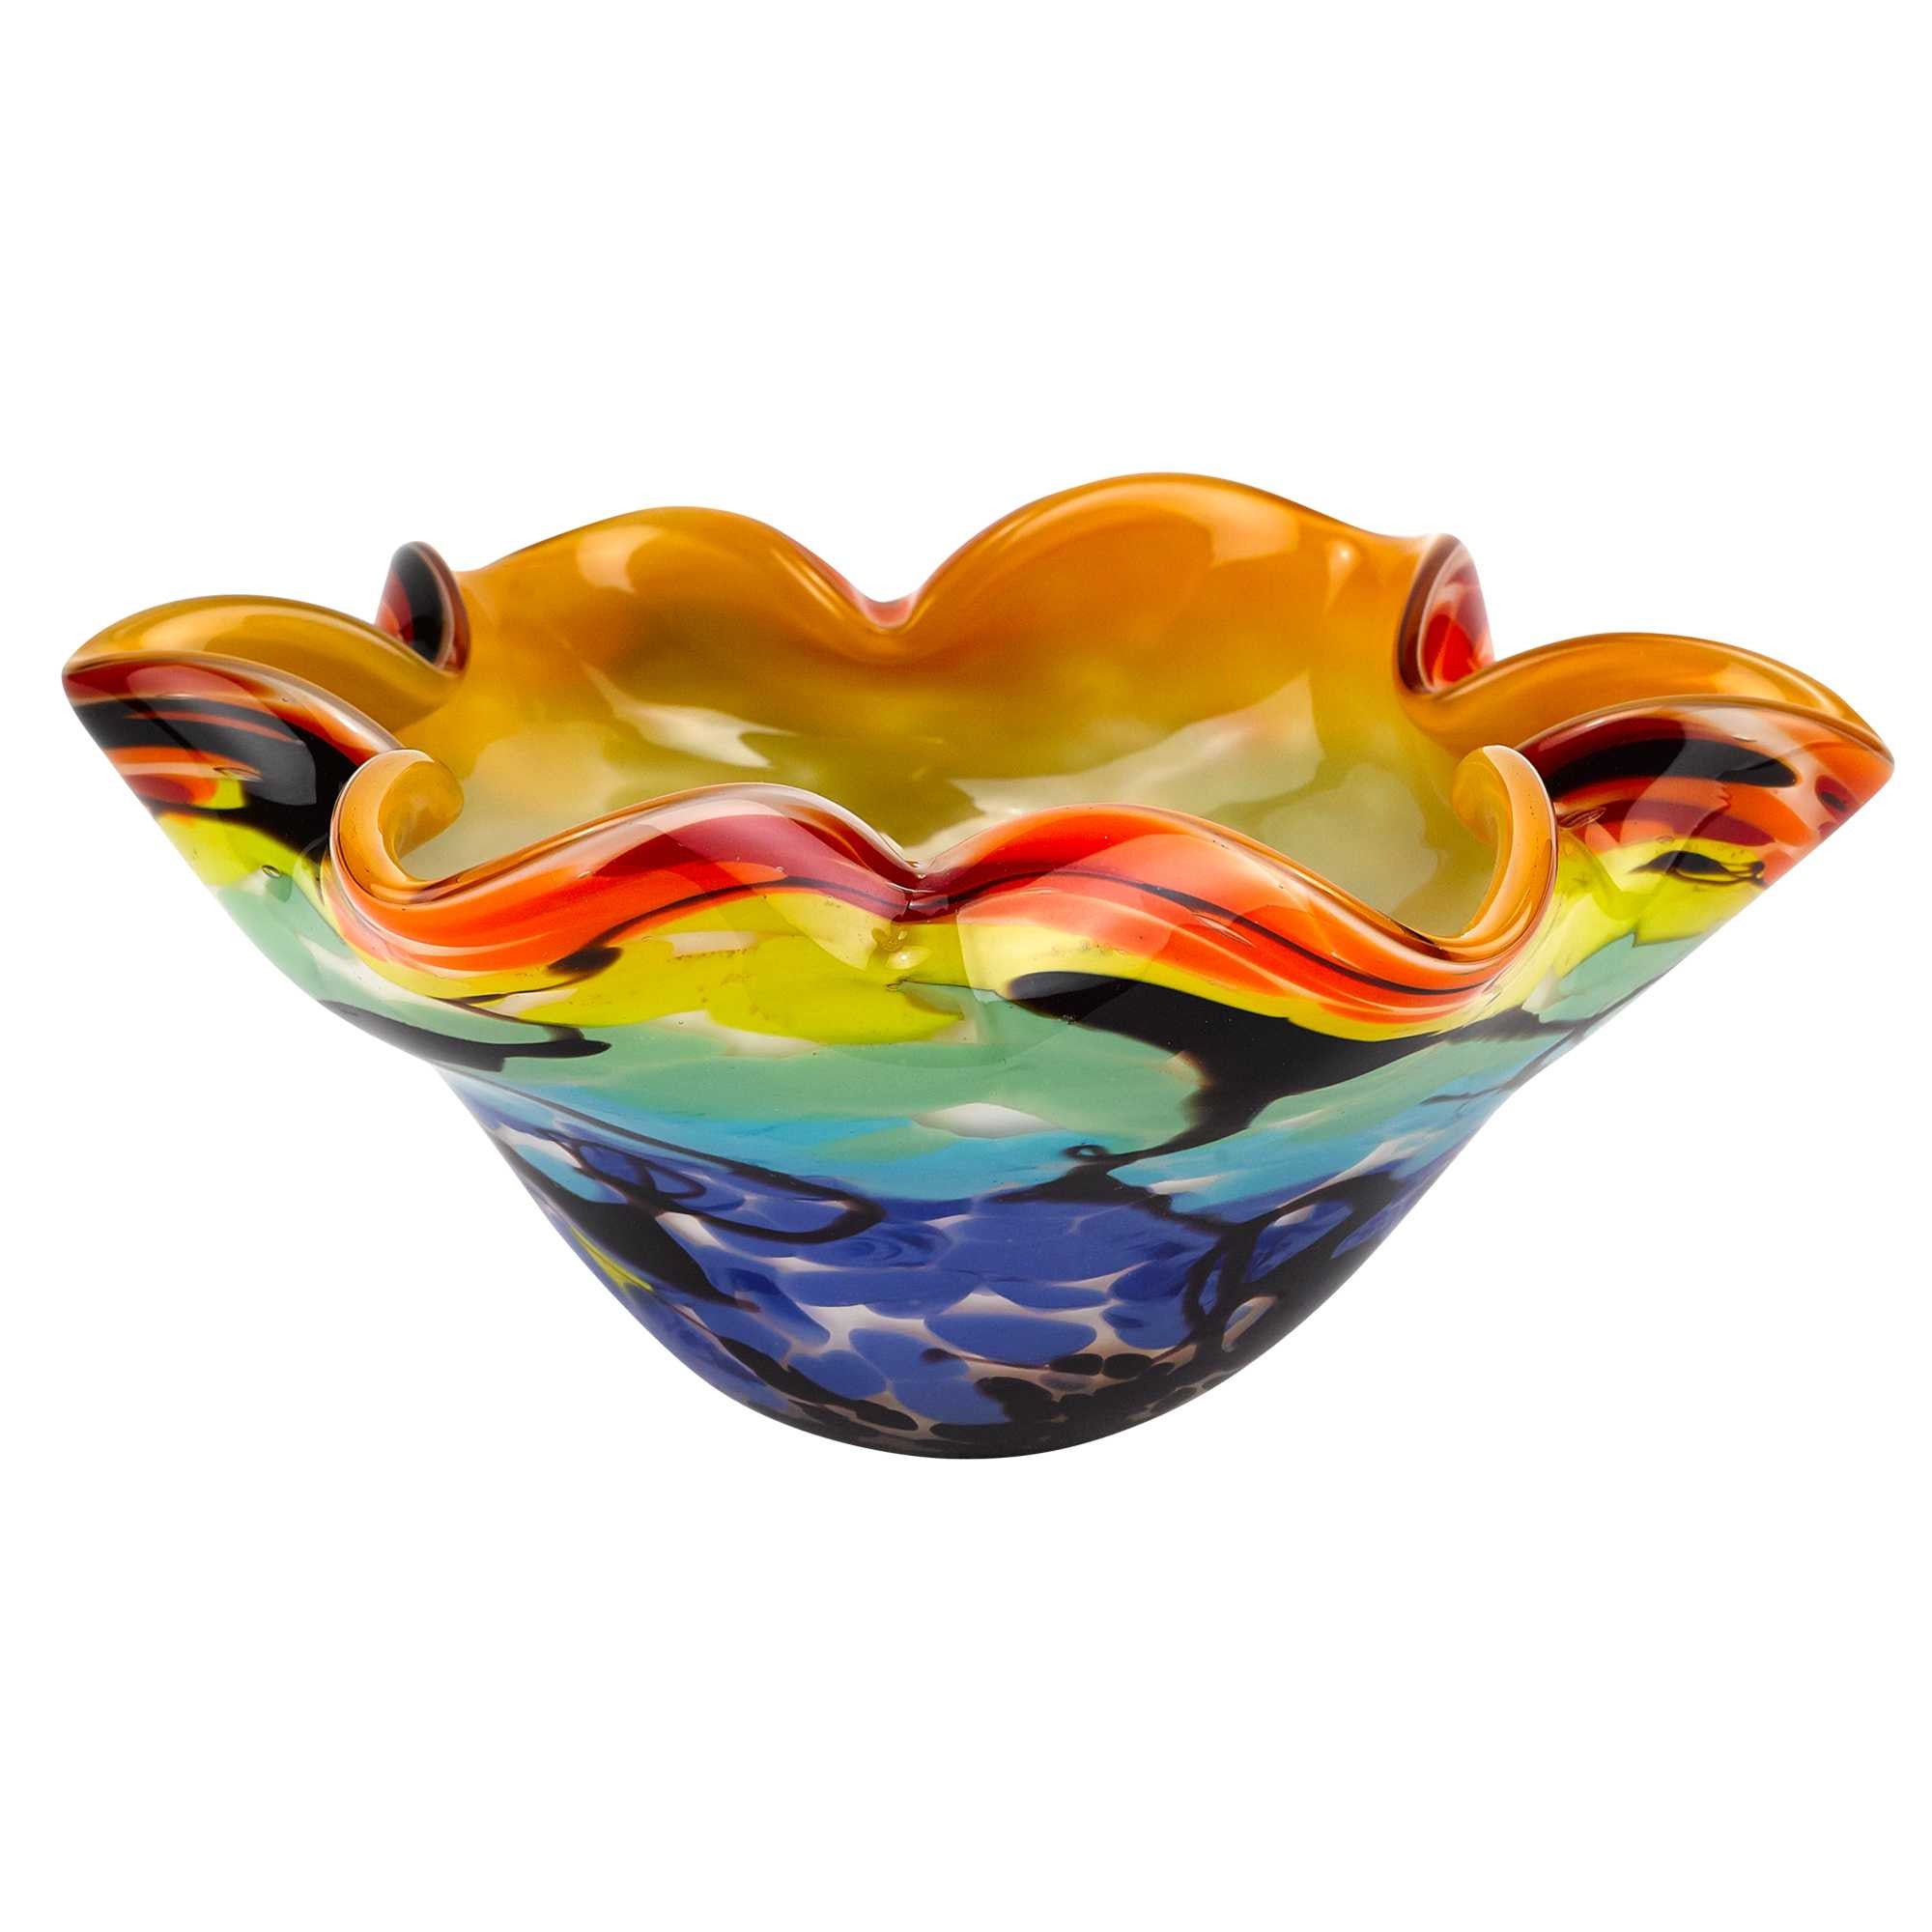 85 Mouth Blown Art Glass Wavy Inch Centerpiece or Candy Bowl